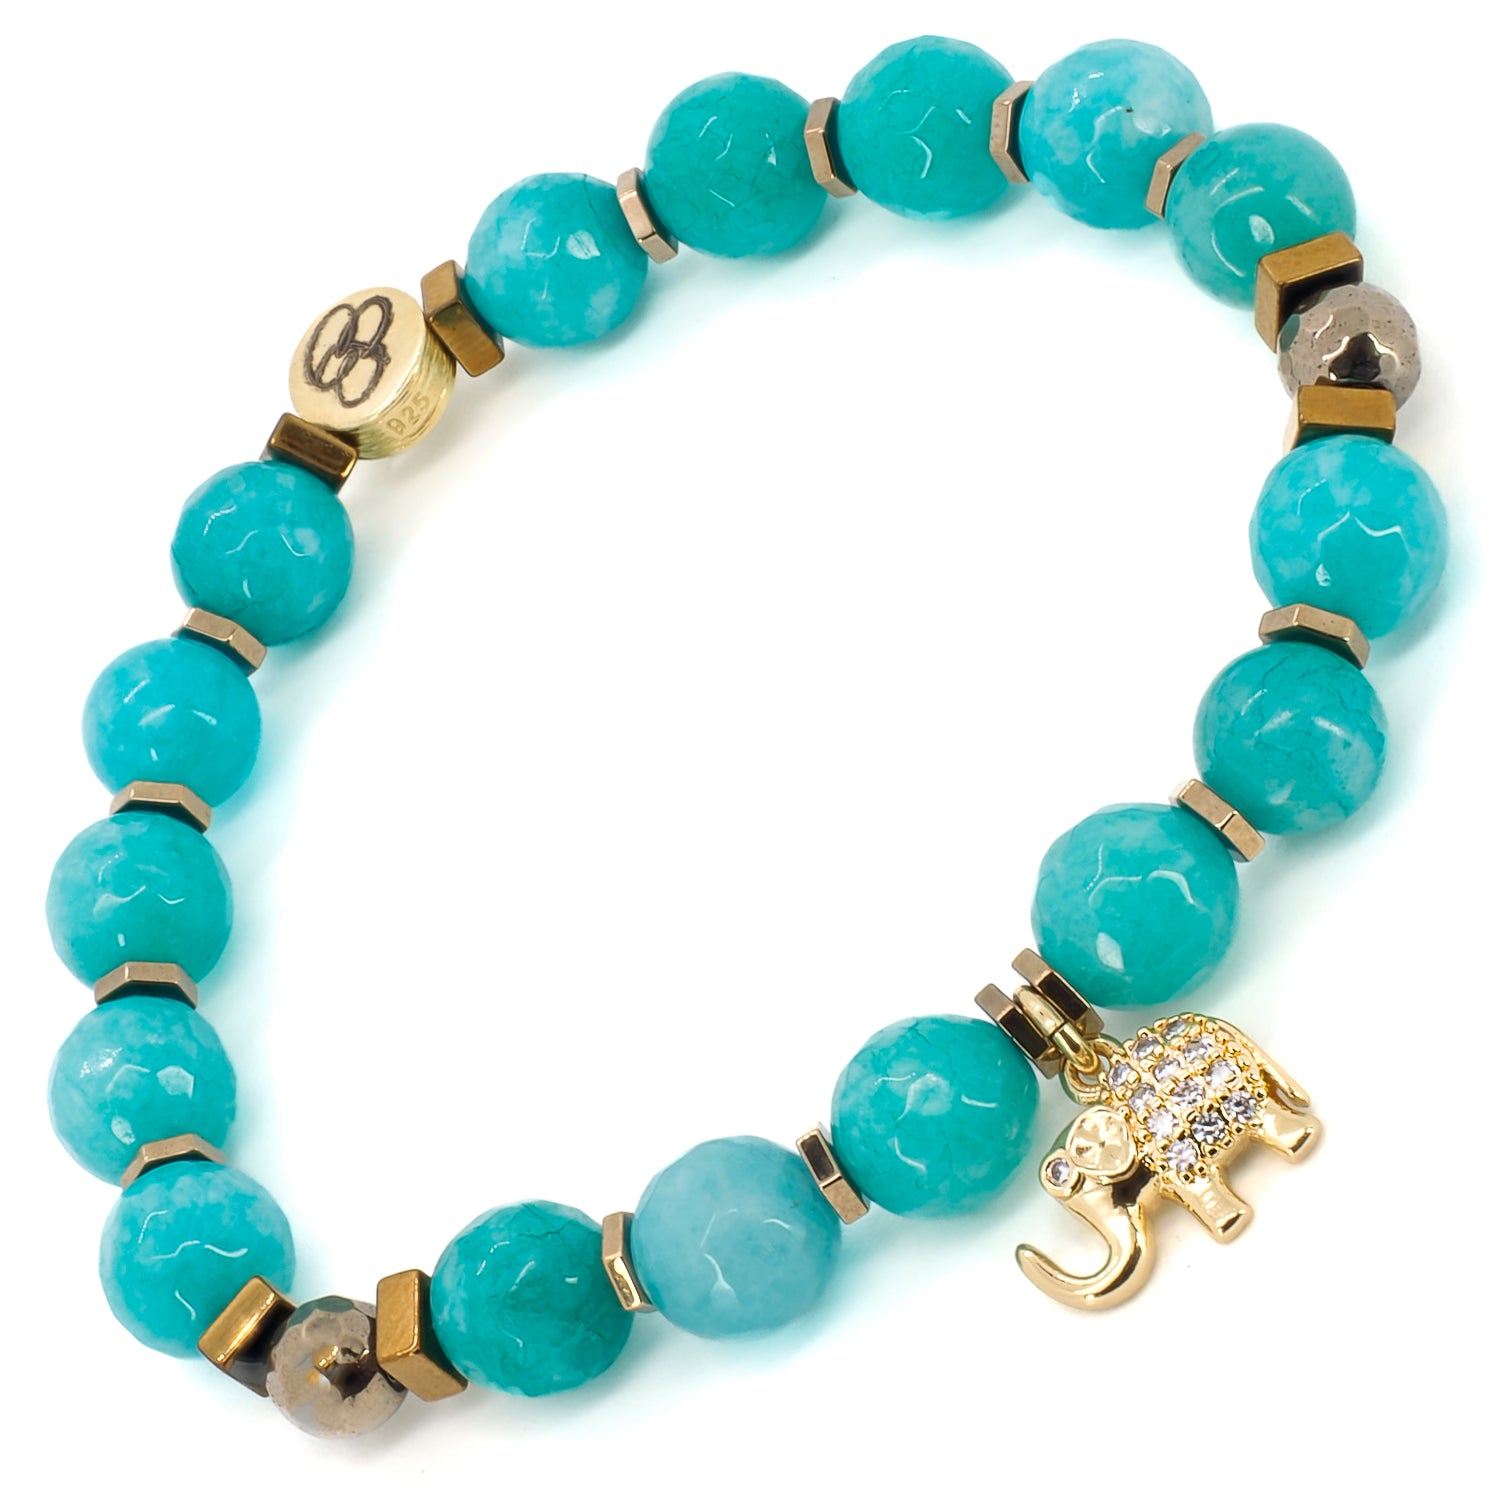 Find hope and positivity with the soothing properties of natural Amazonite stone